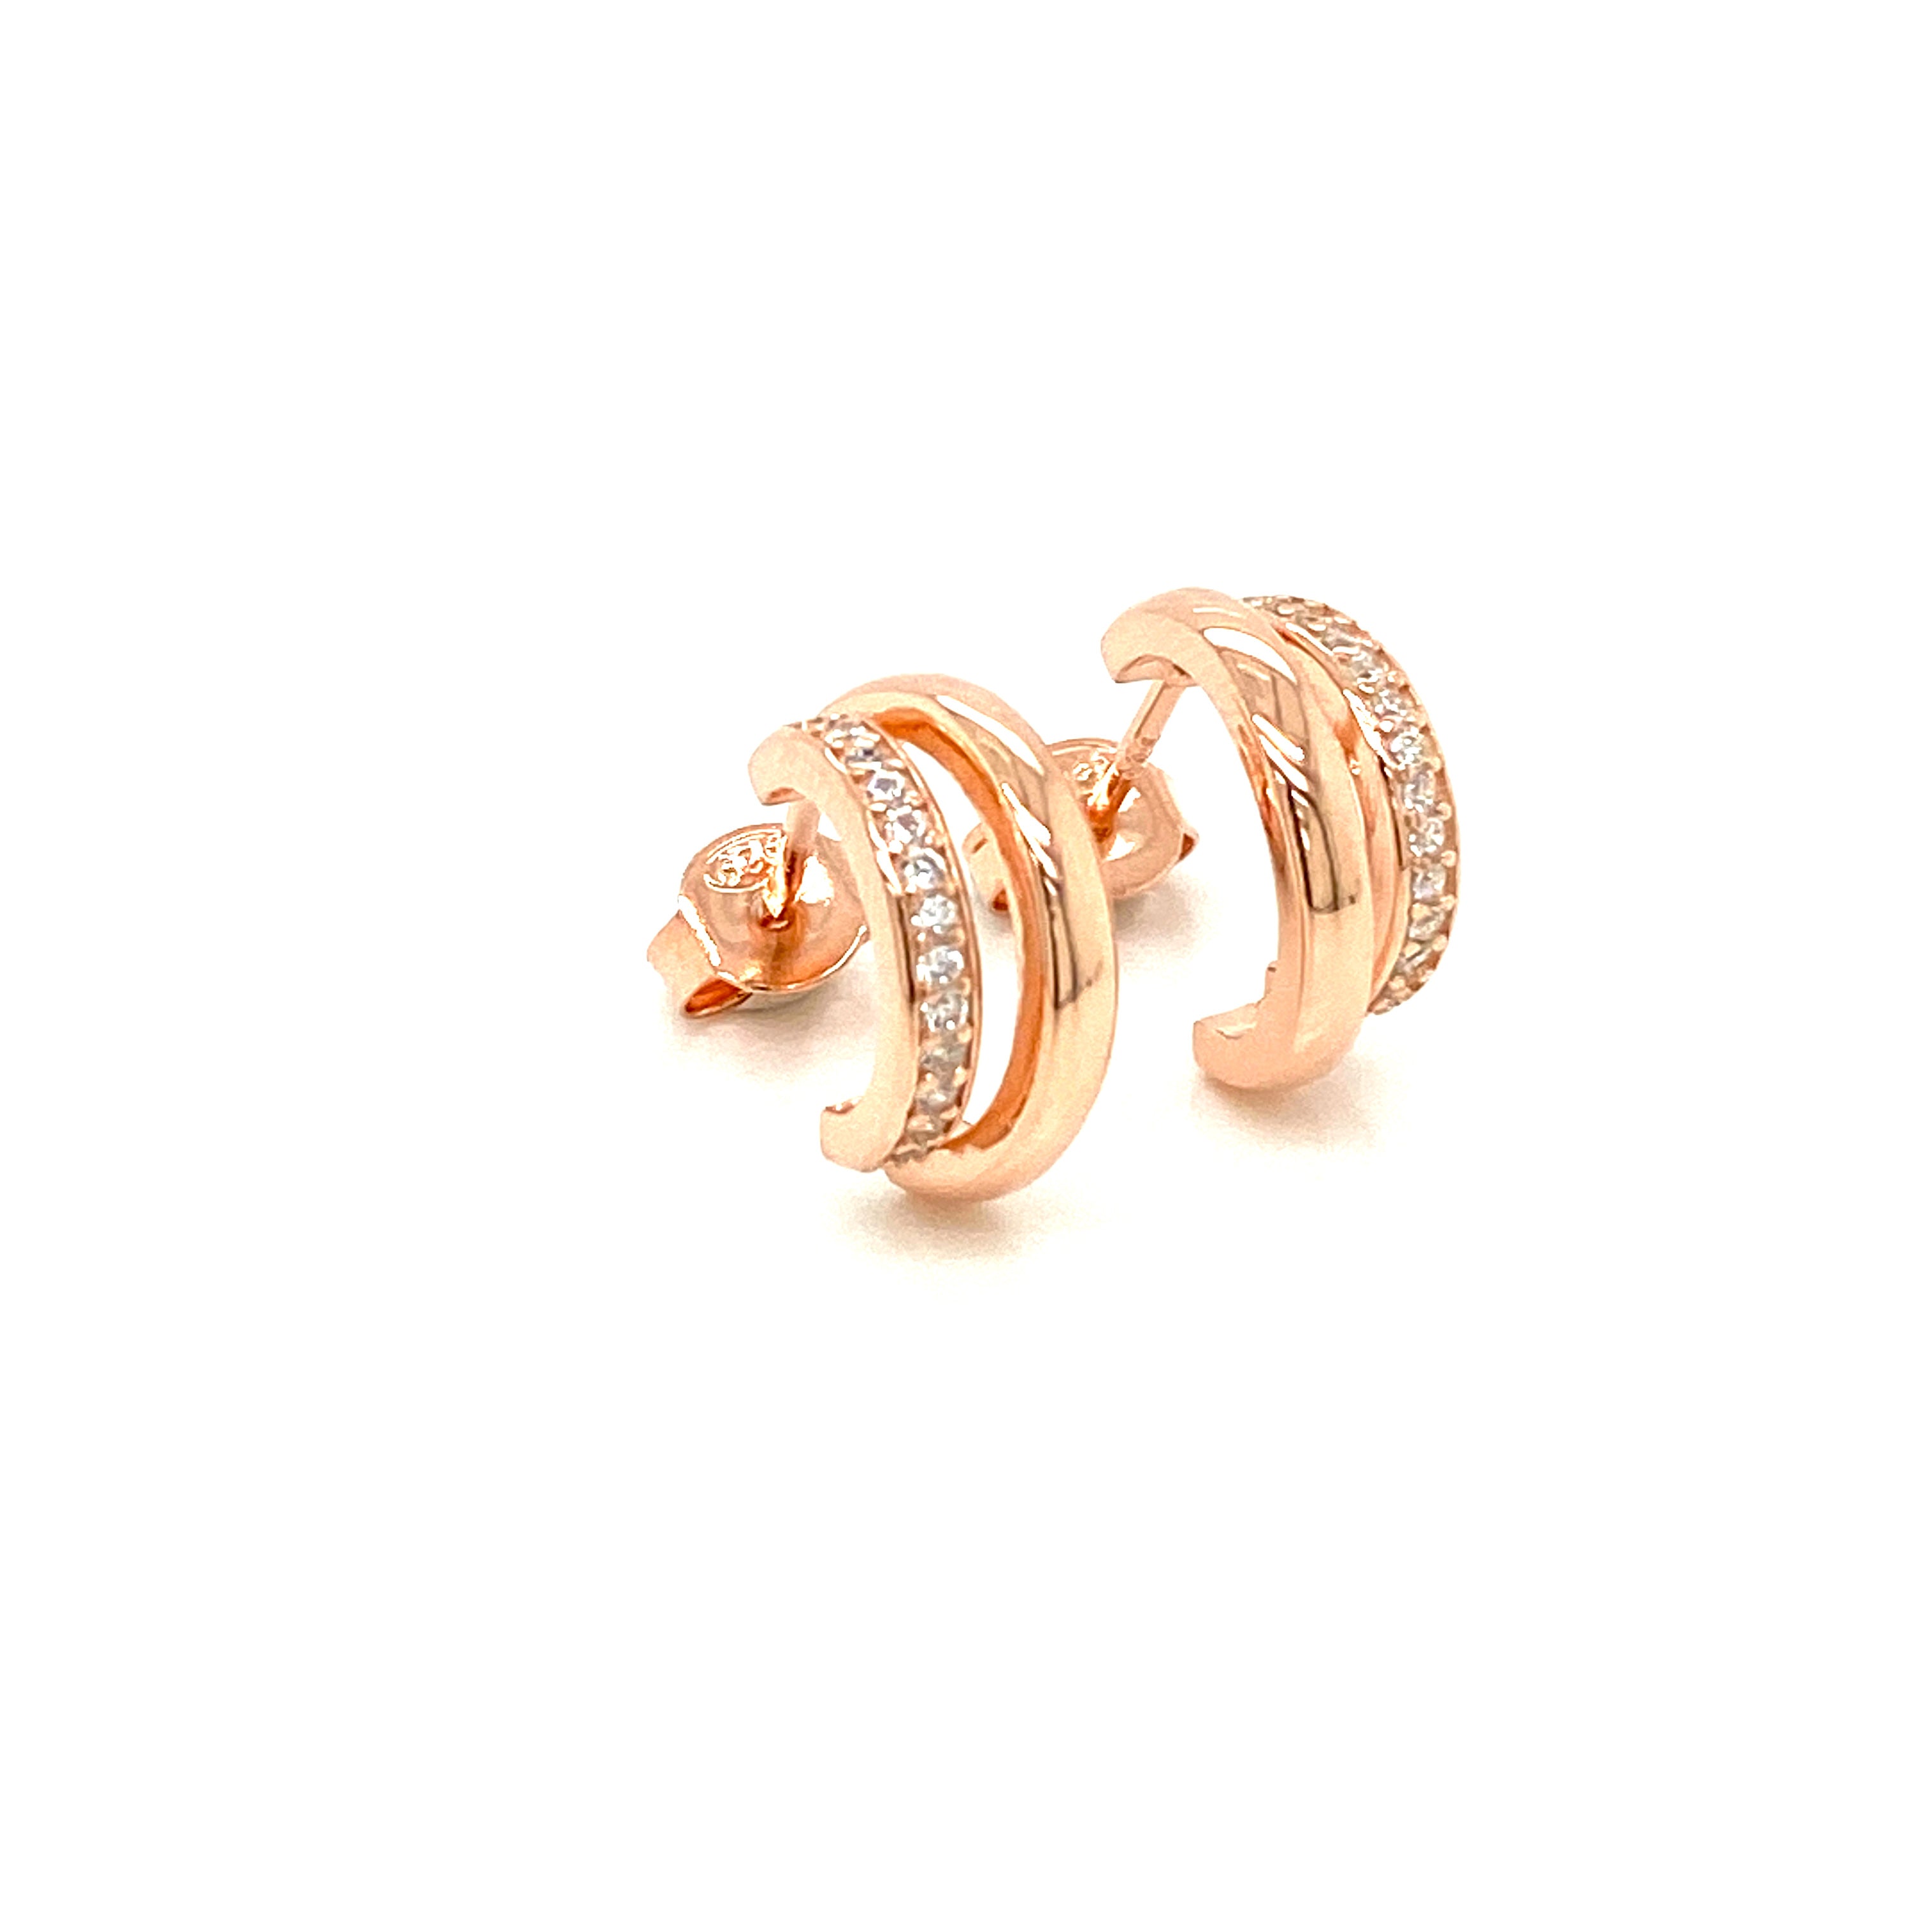 Rose gold Plated Two Row Cubic Zirconia Stud Earrings